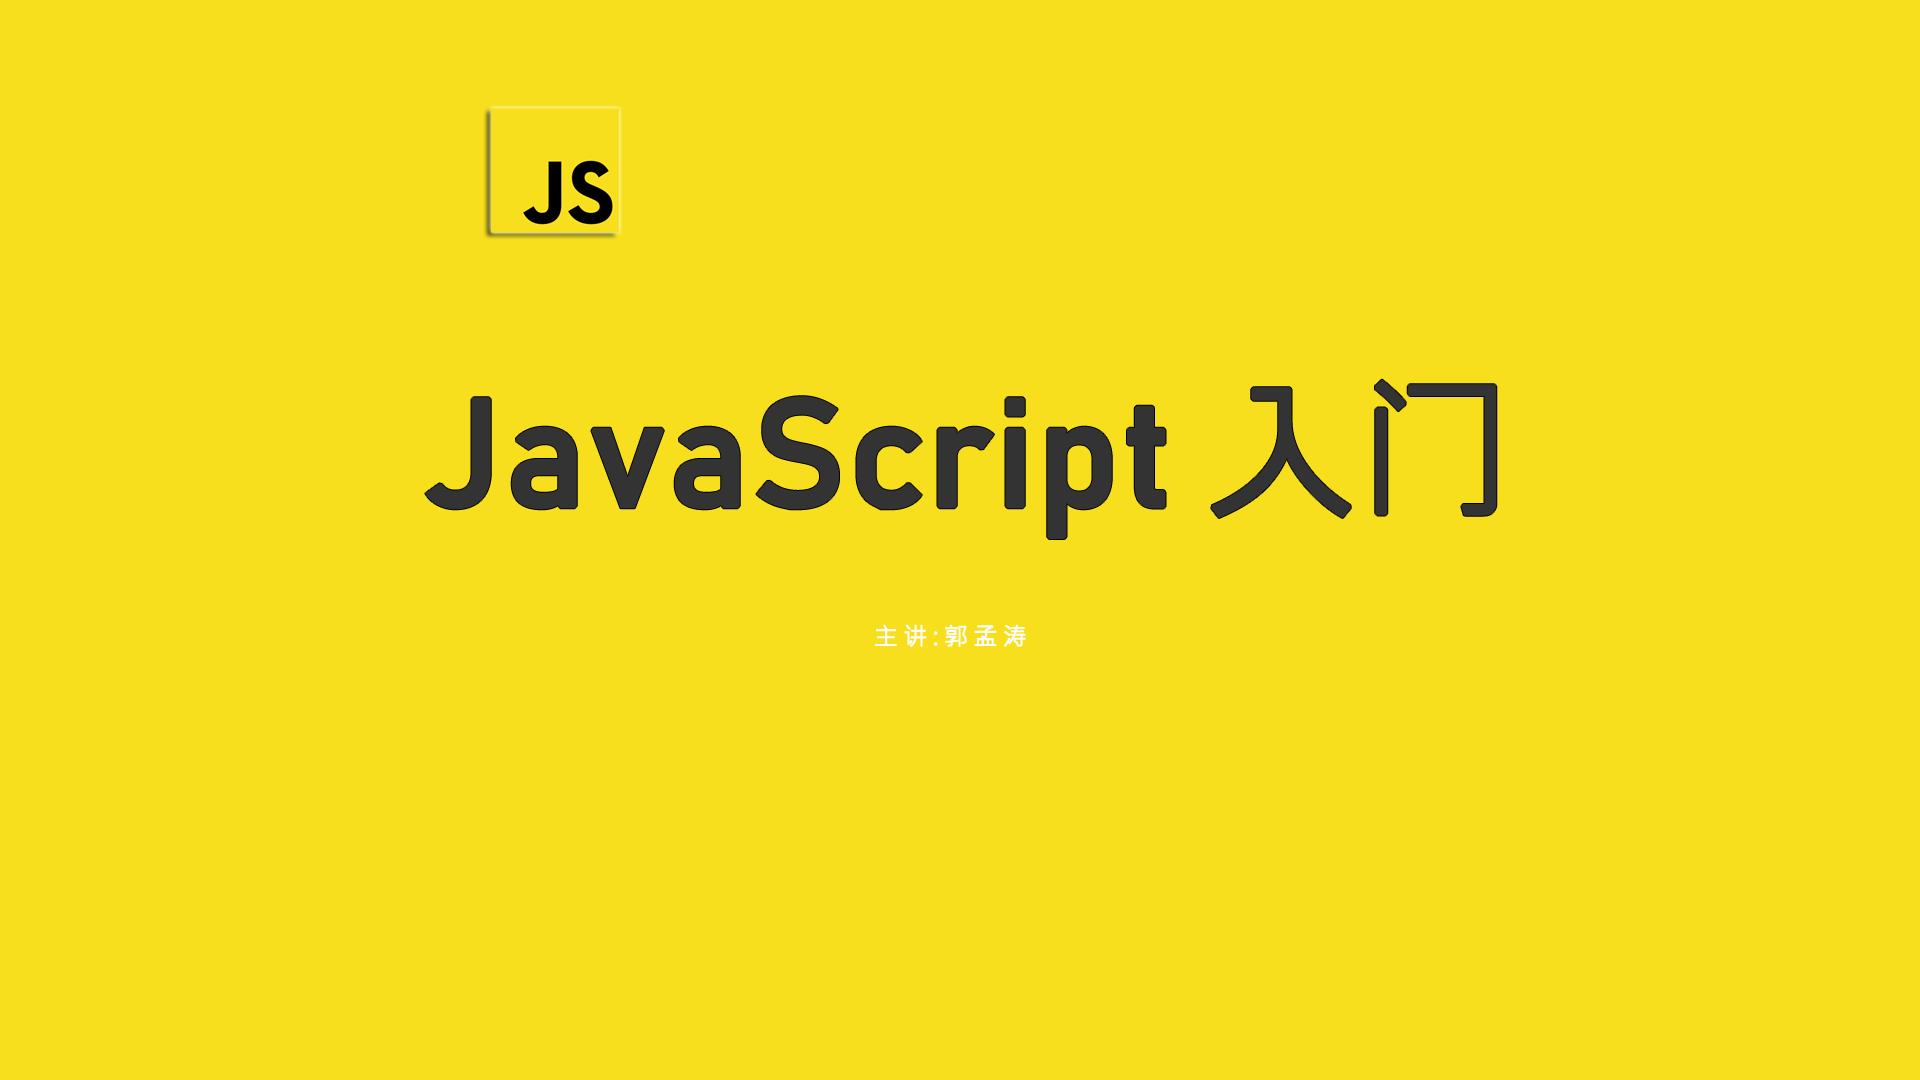  Getting Started with JavaScript